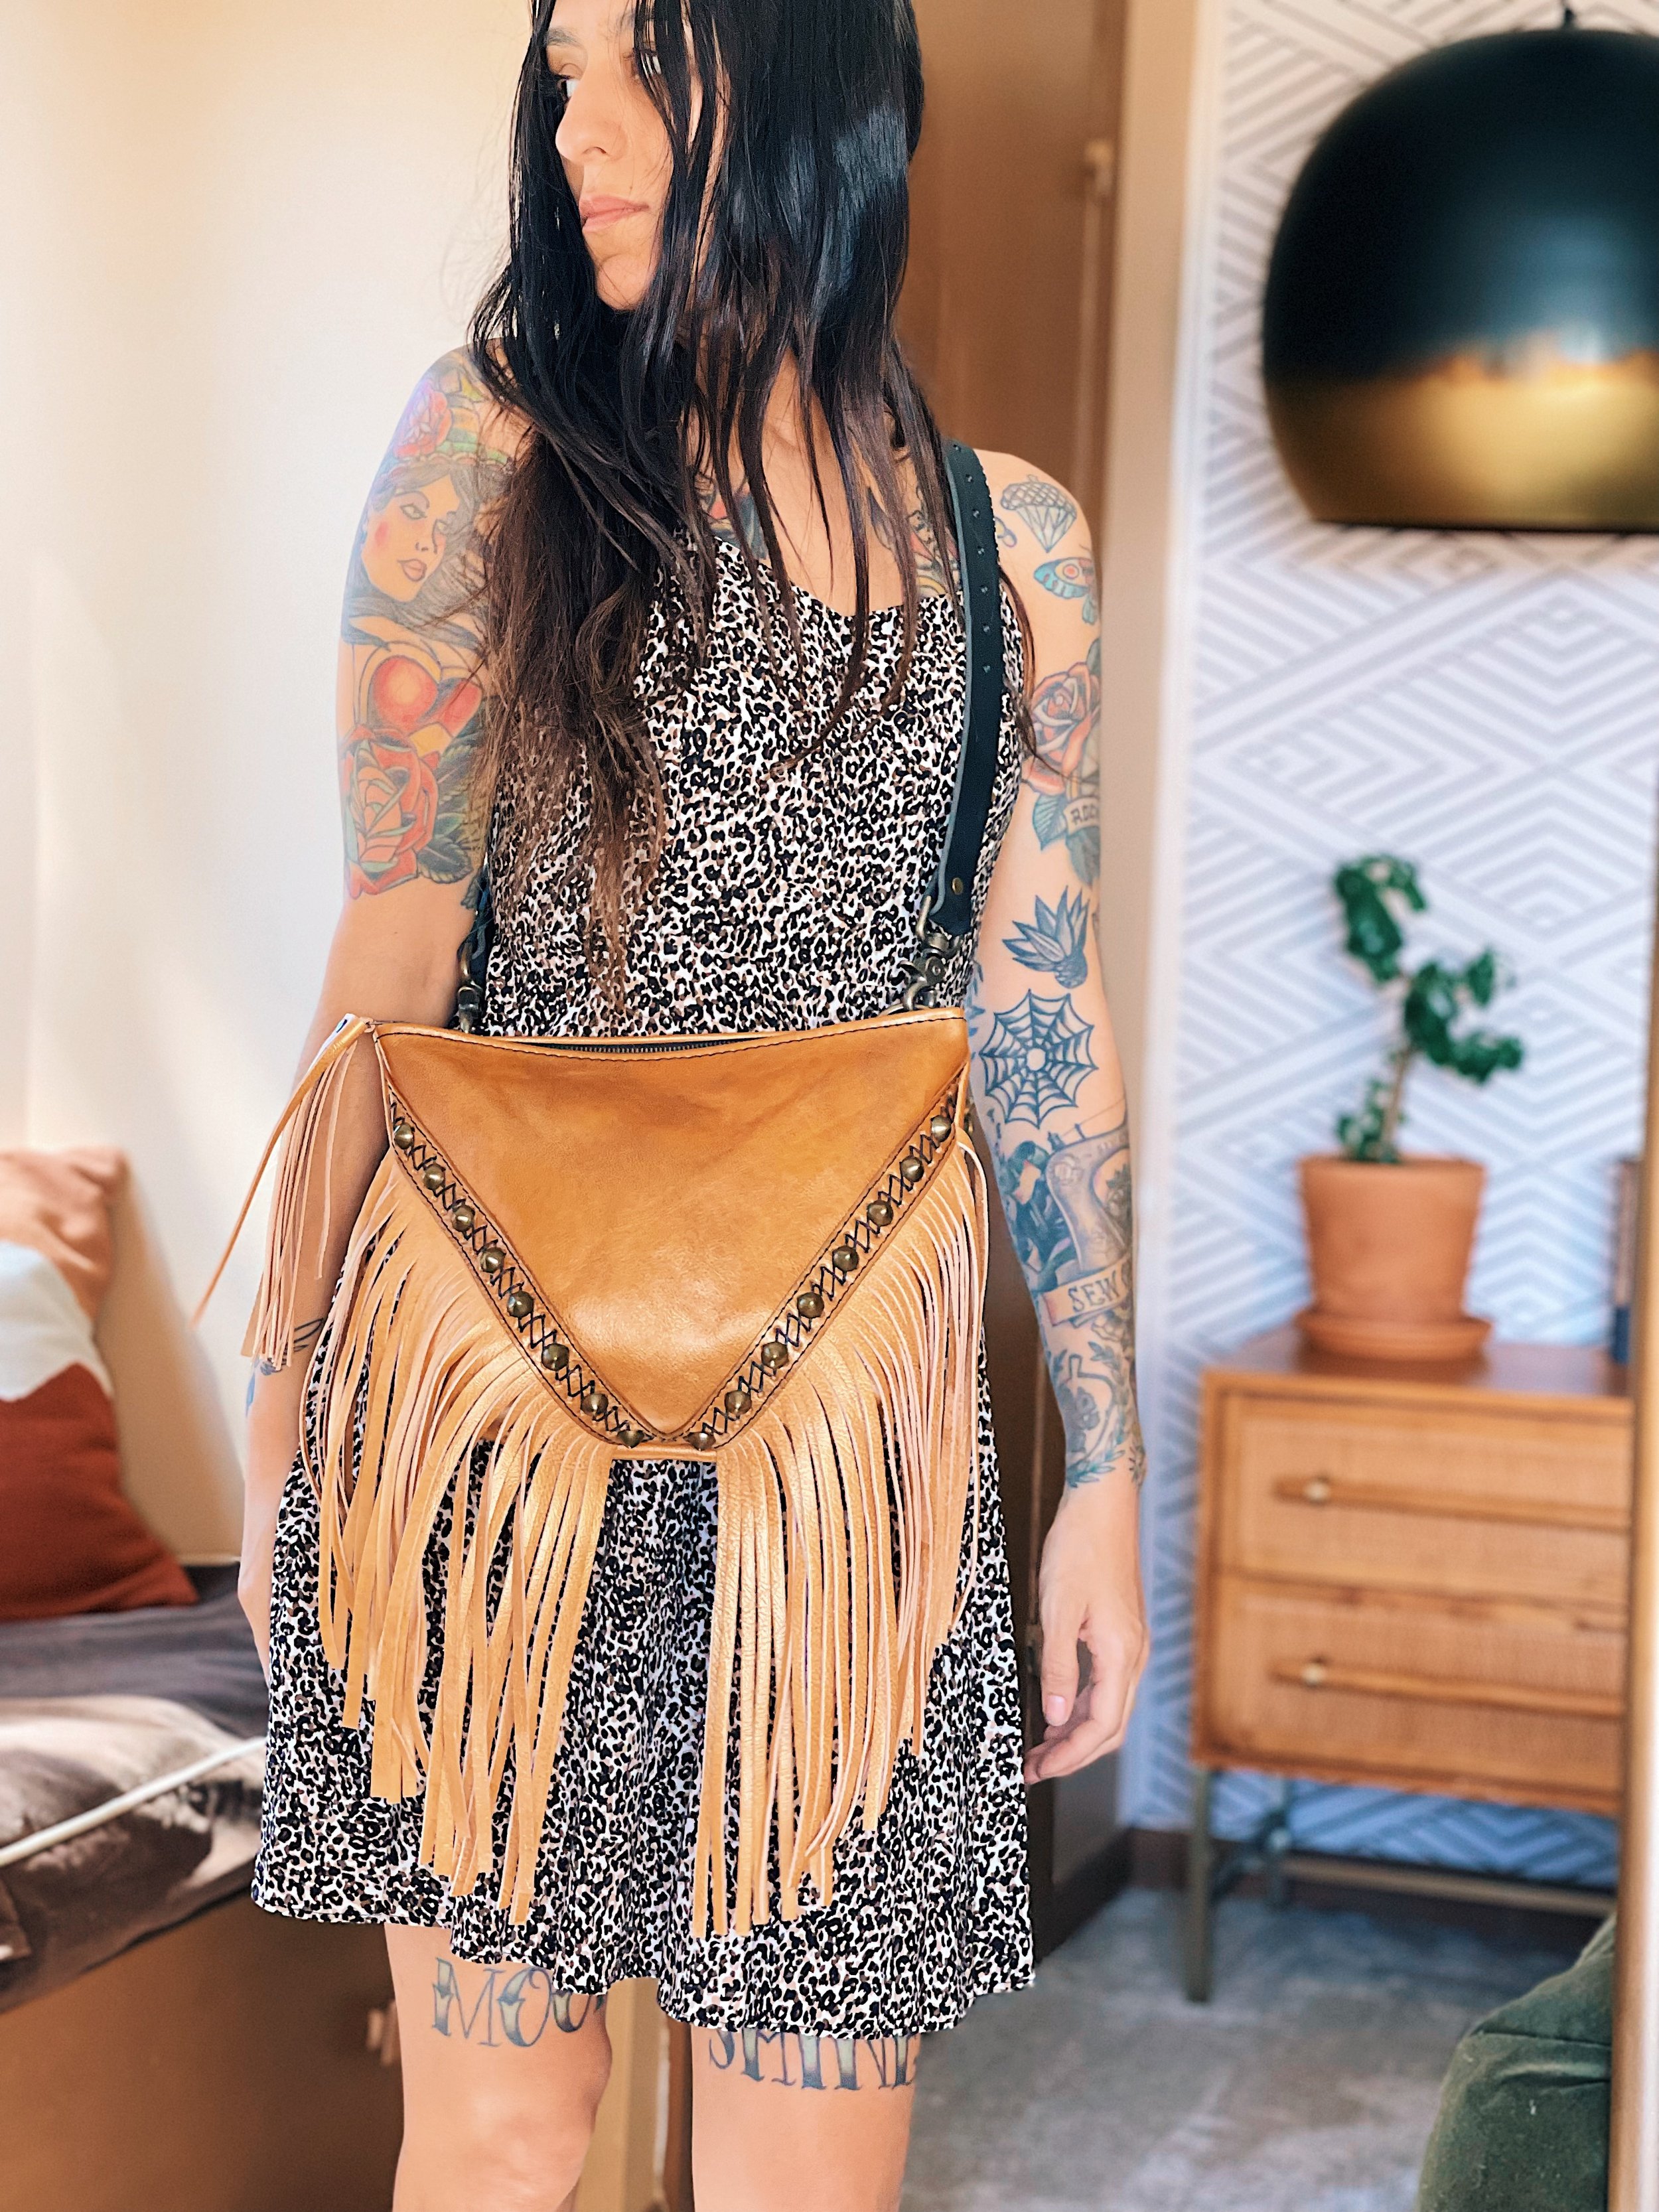  BODY: vegetable tanned cowhide leather, hand dyed desert gold.  FRINGE: vegetable tanned cowhide leather, hand dyed gold  ADDITIONS: criss cross hand-stitching and studs 